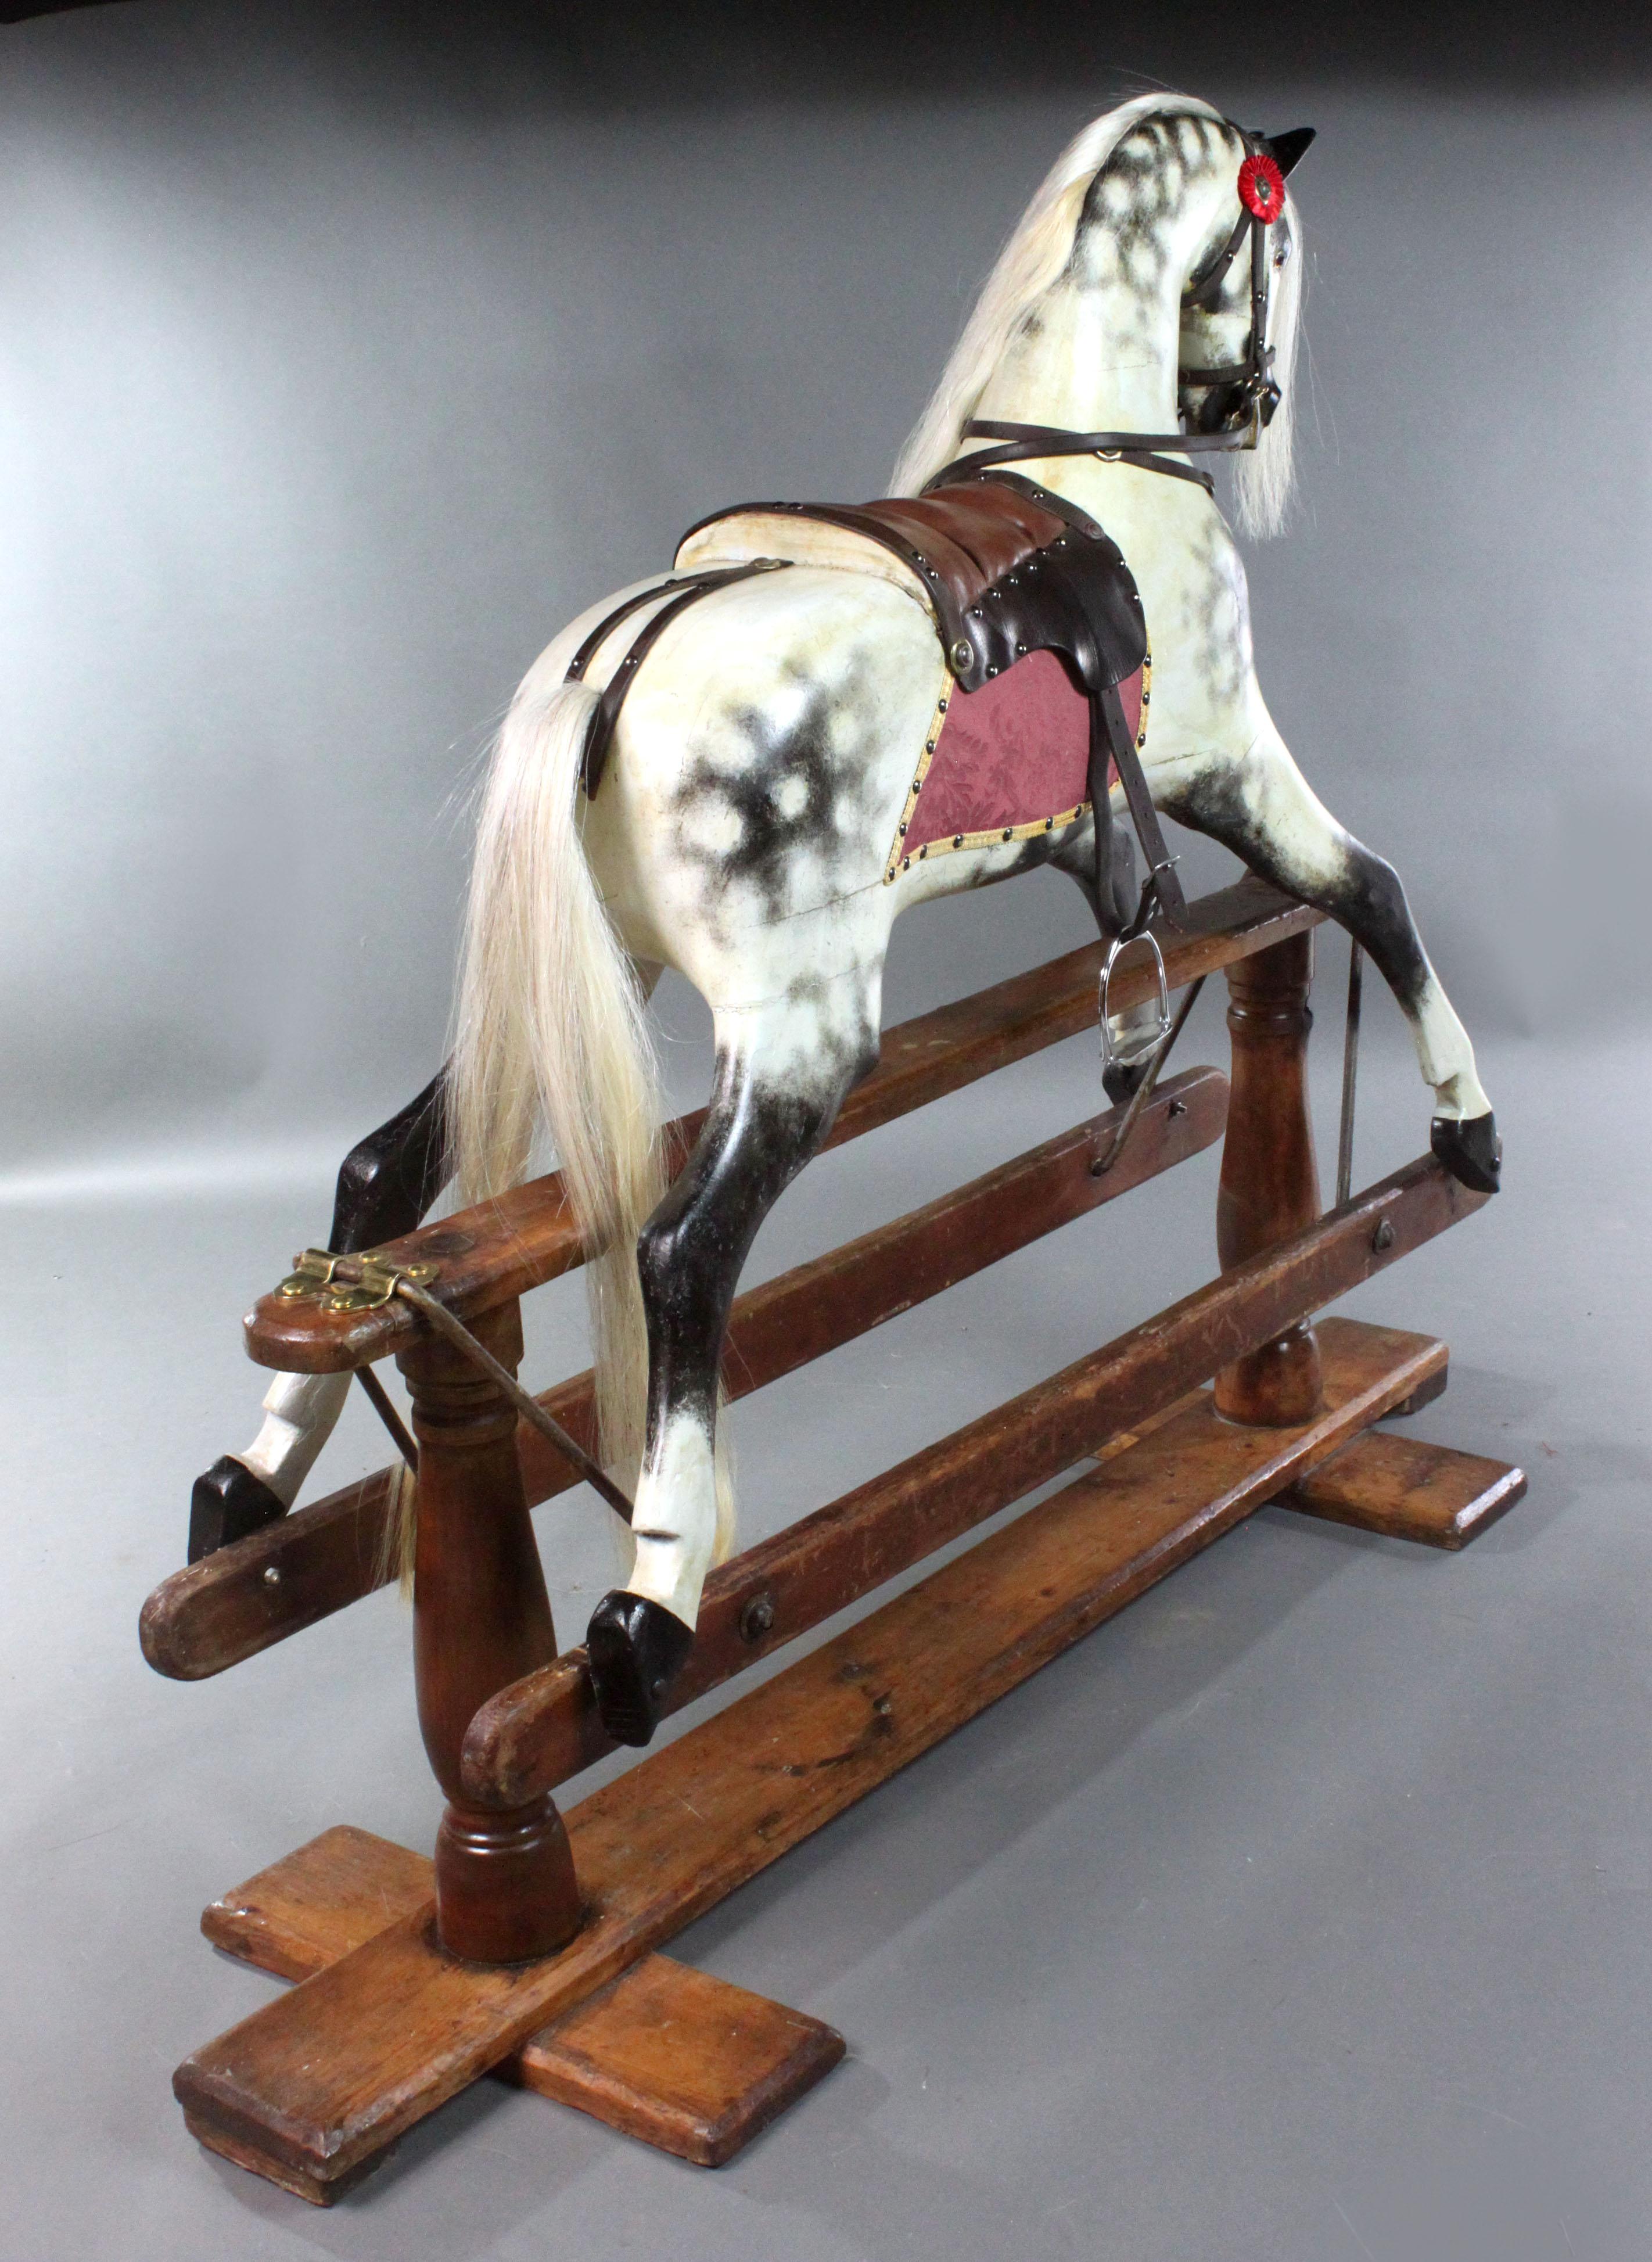 Hand-Painted Antique Rocking Horse by F. H. Ayres